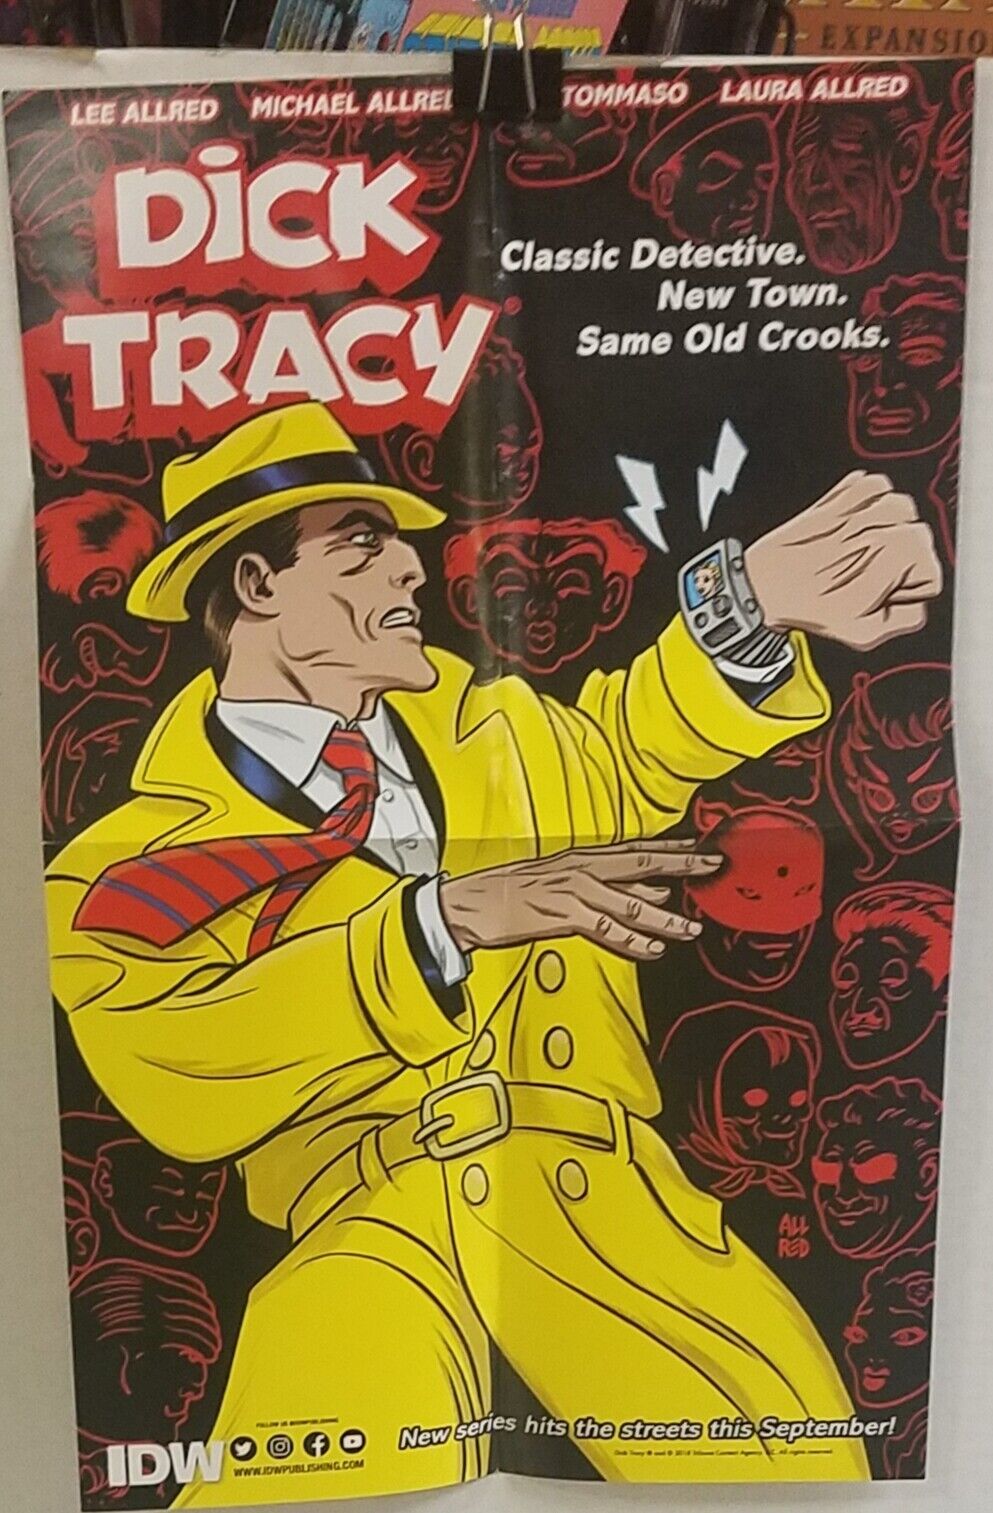 RARE 2018 Promo Poster DICK TRACY  17x11 MIKE ALLRED IDW Comics UNUSED